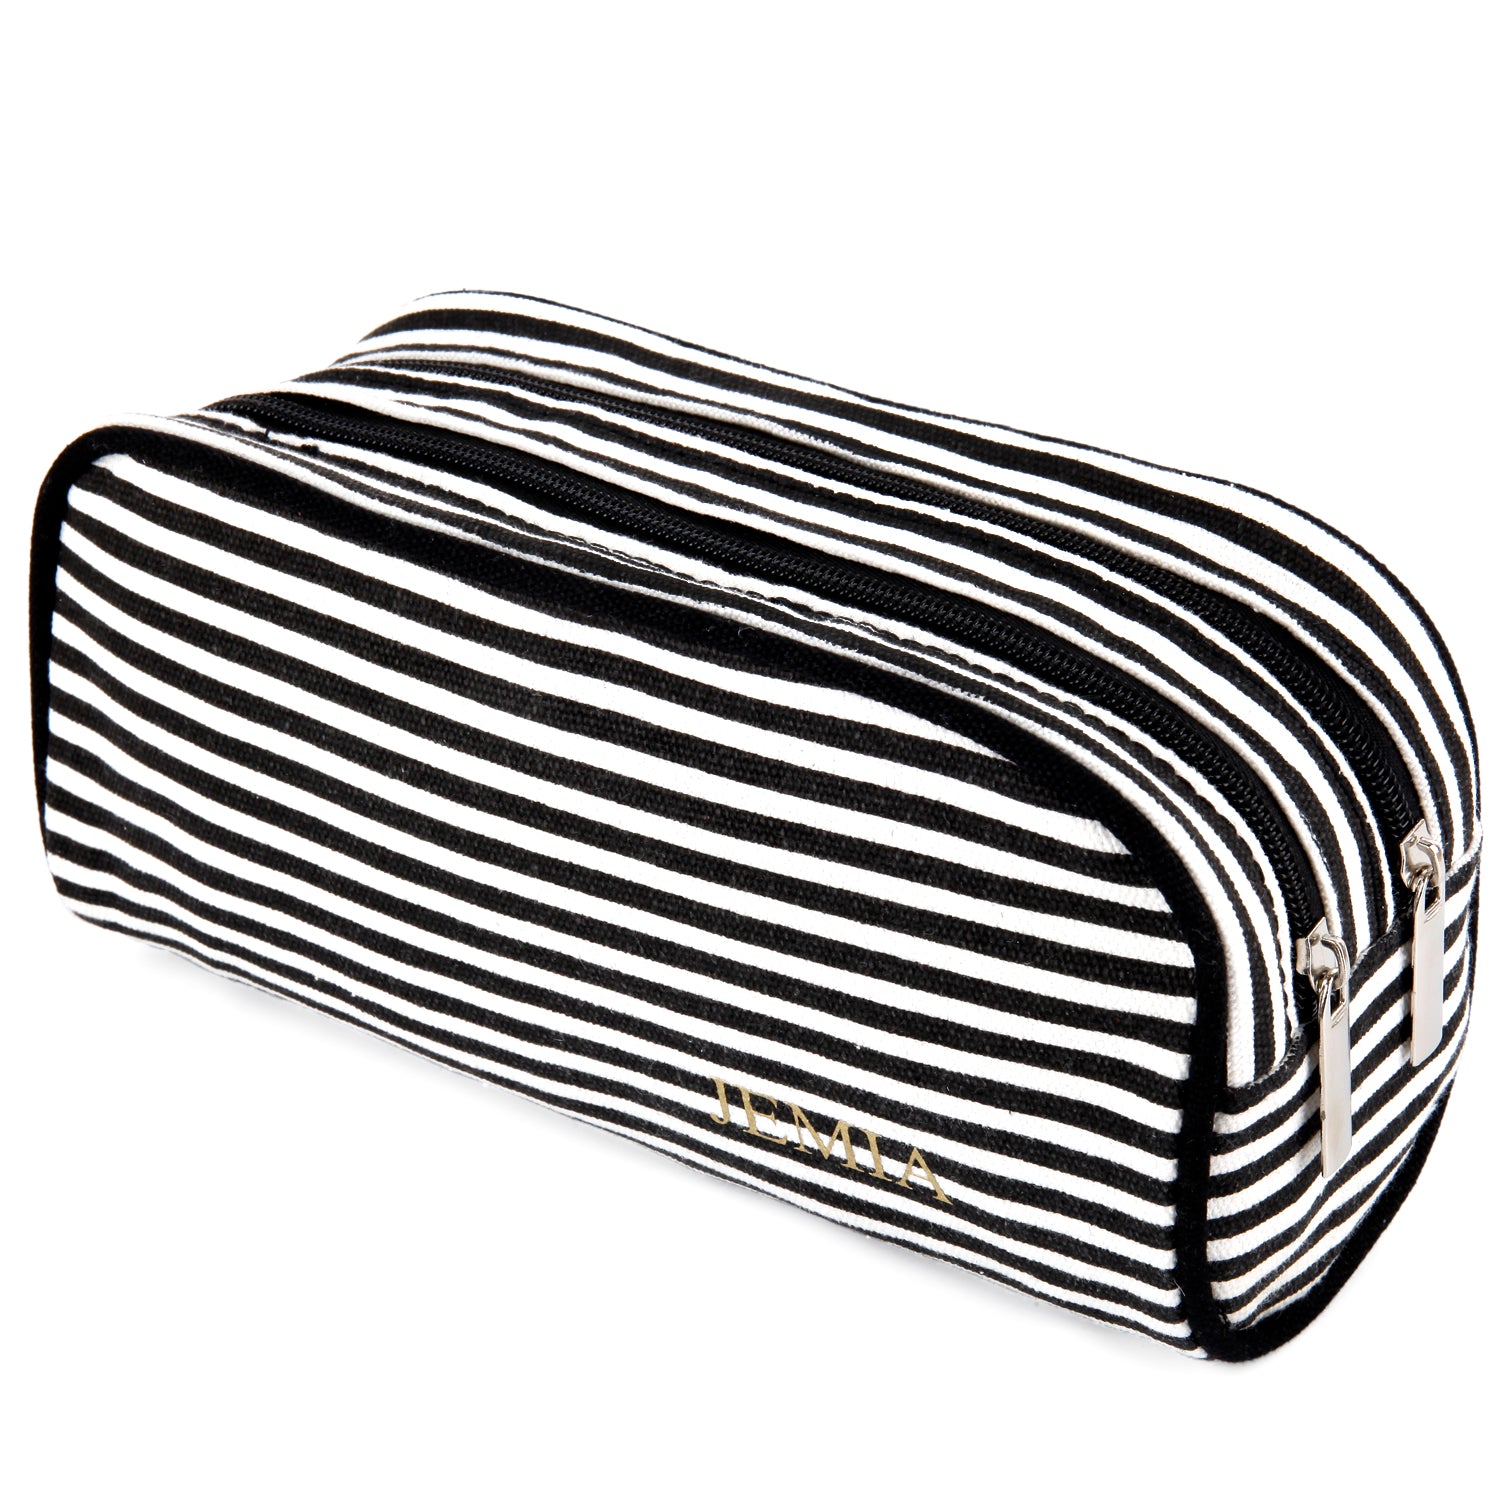 Dual Compartments Pencil Case with Mesh Pockets (Black White Stripes, Canvas) - JEMIA